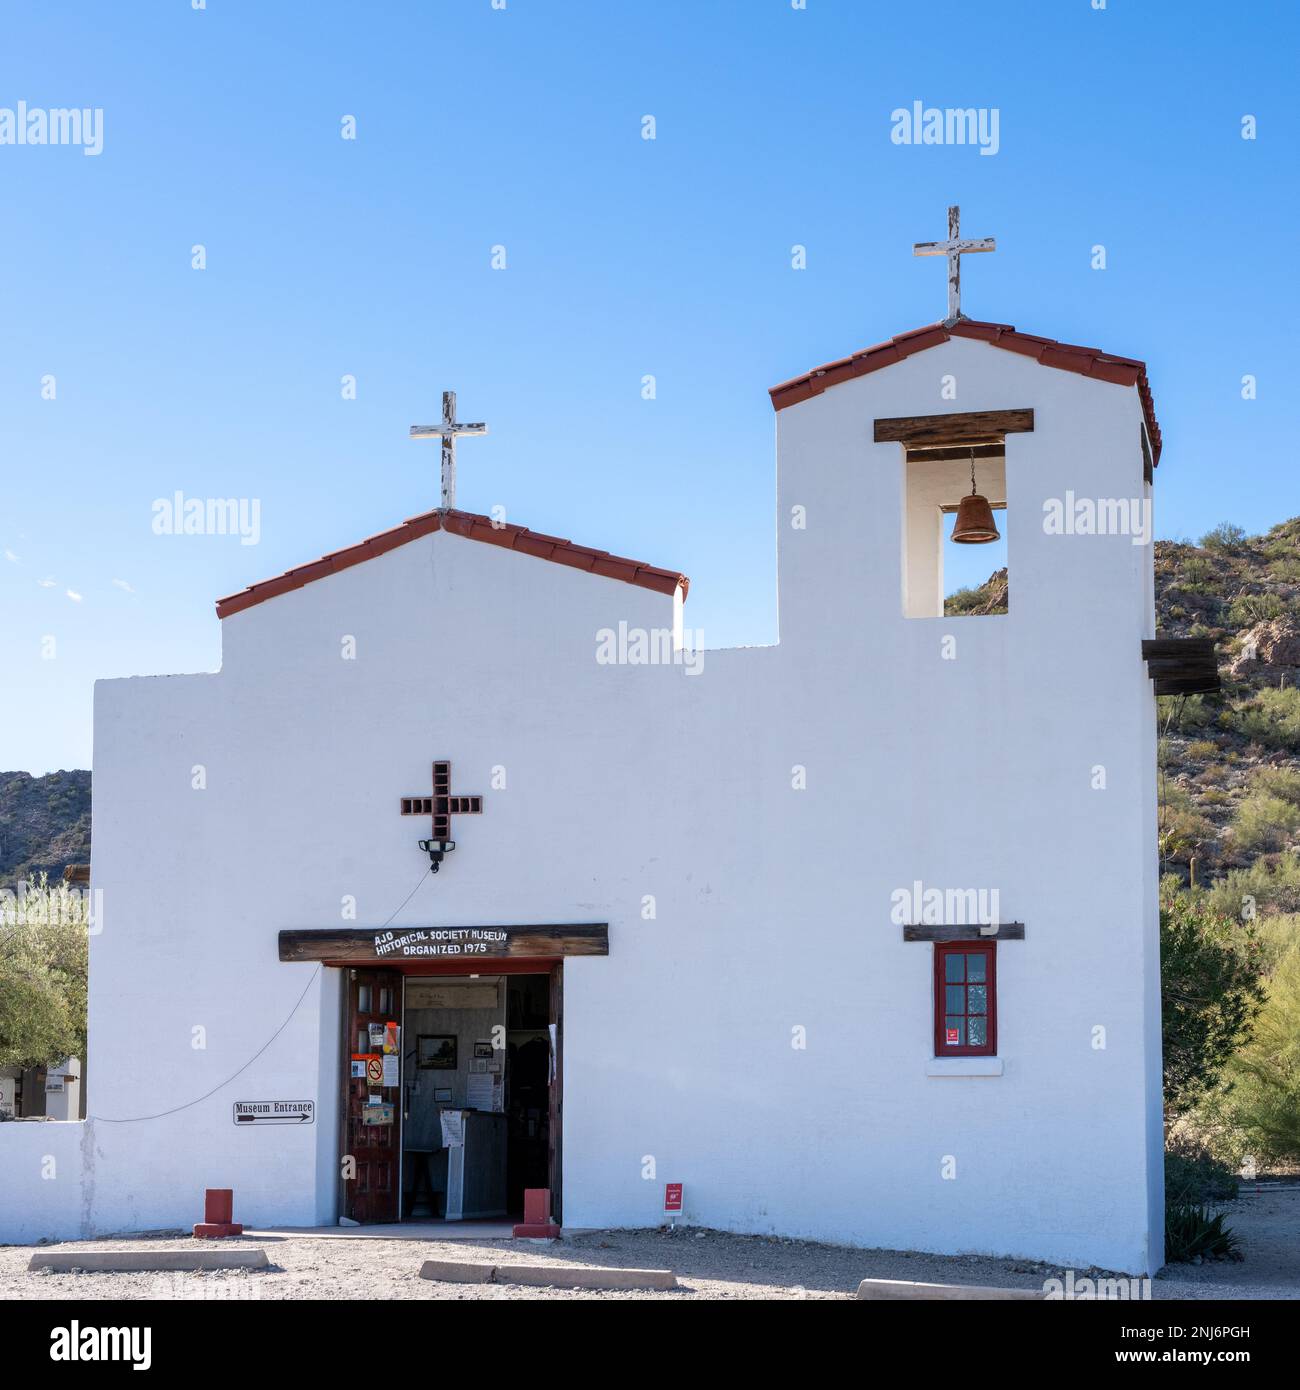 Ajo, AZ - Nov. 28, 2022: Ajo Historical Society Museum is housed in an old mission Stock Photo